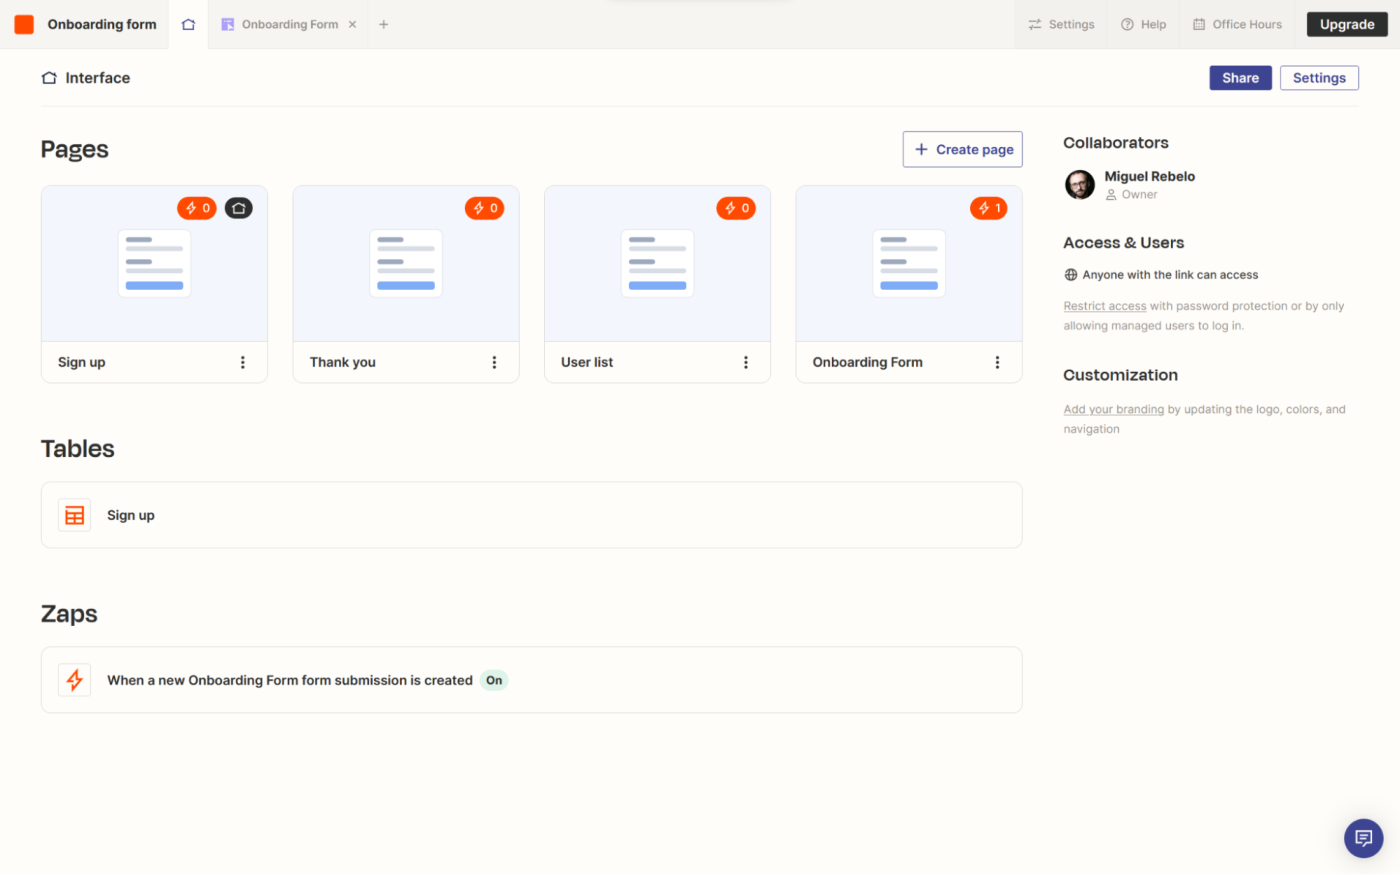 Zapier Interfaces, our pick for the best collaboration software for building internal tools.